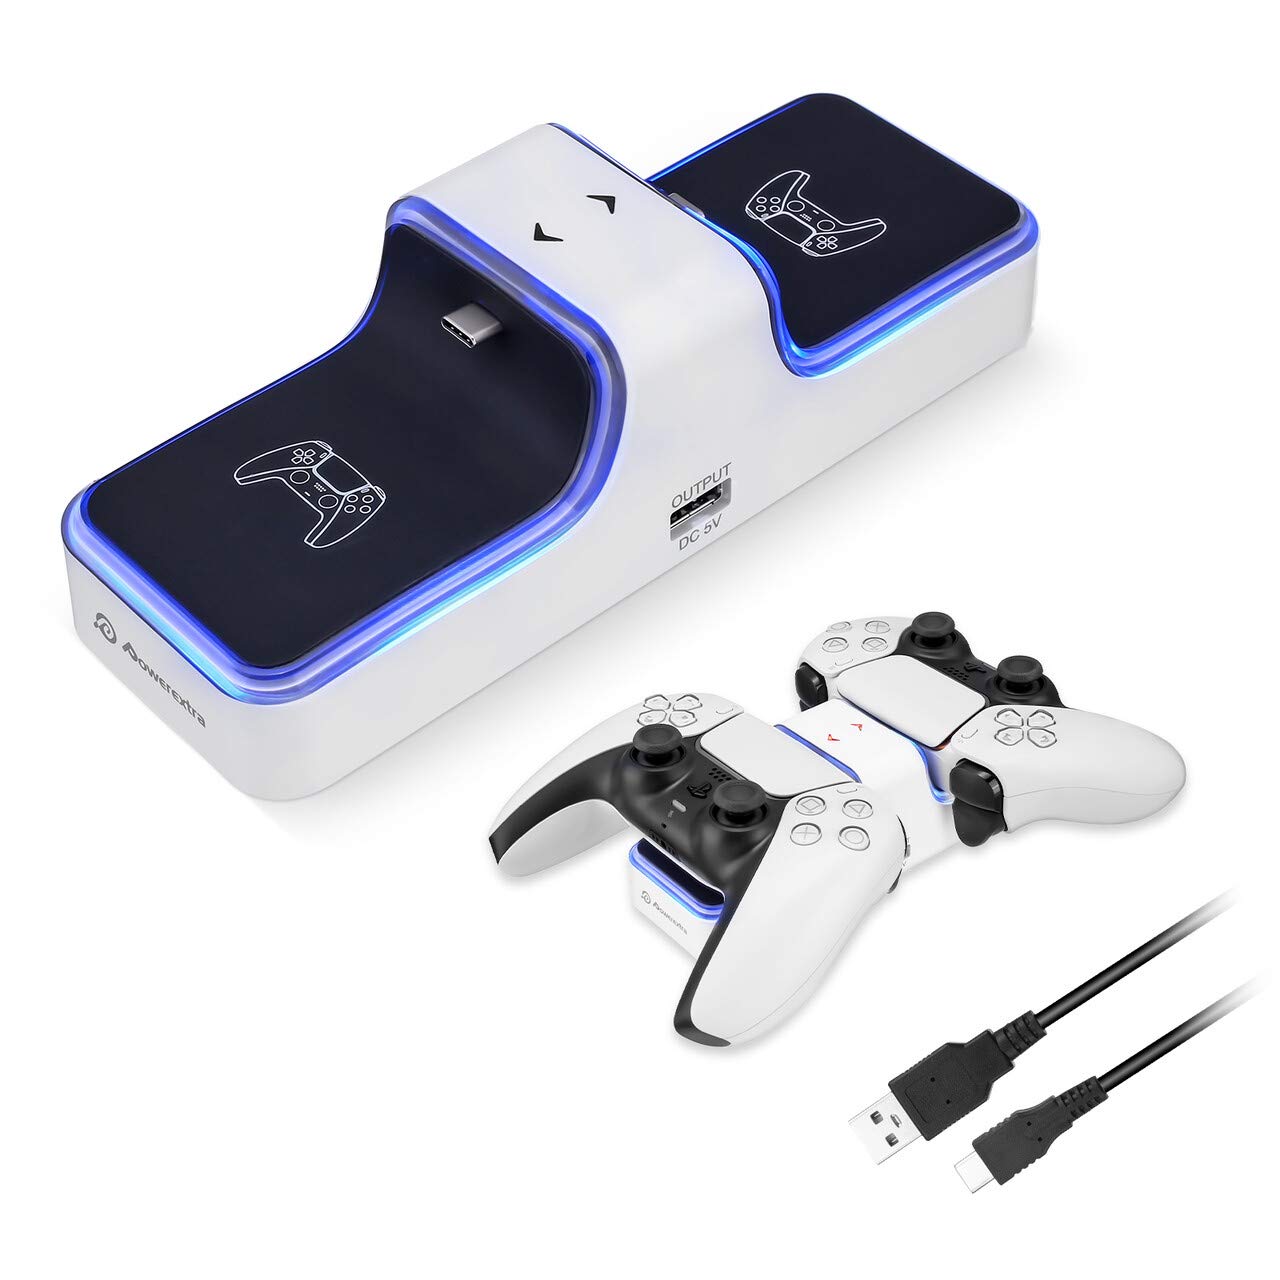 Powerextra Control Charger for PS5 - Charging Station for Playstation 5 Dual Charger Compatible with DualSense Playstation 5 Controllers with LED Indicator - Charging Type-C